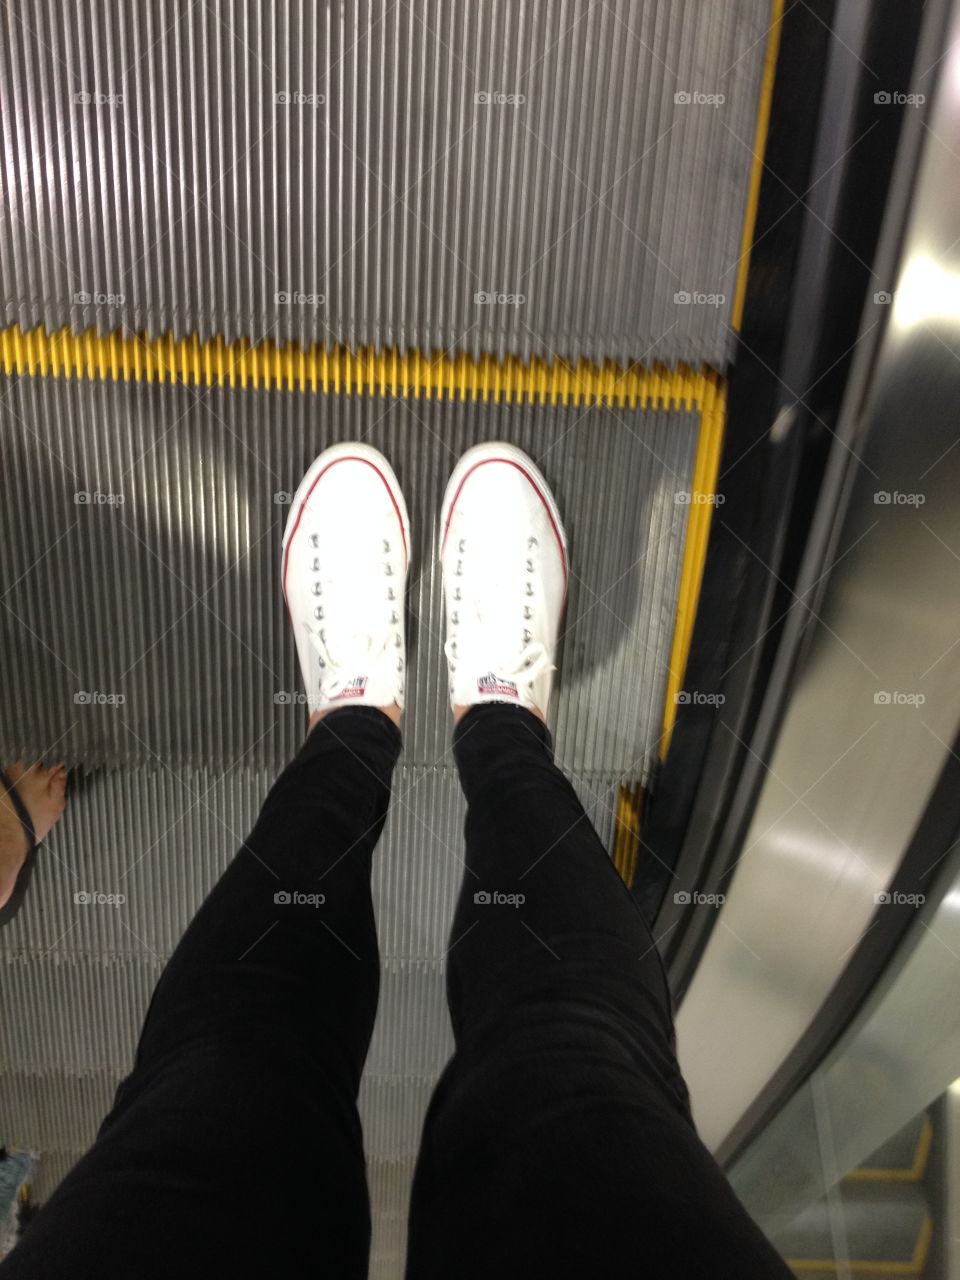 Going up the escalator 